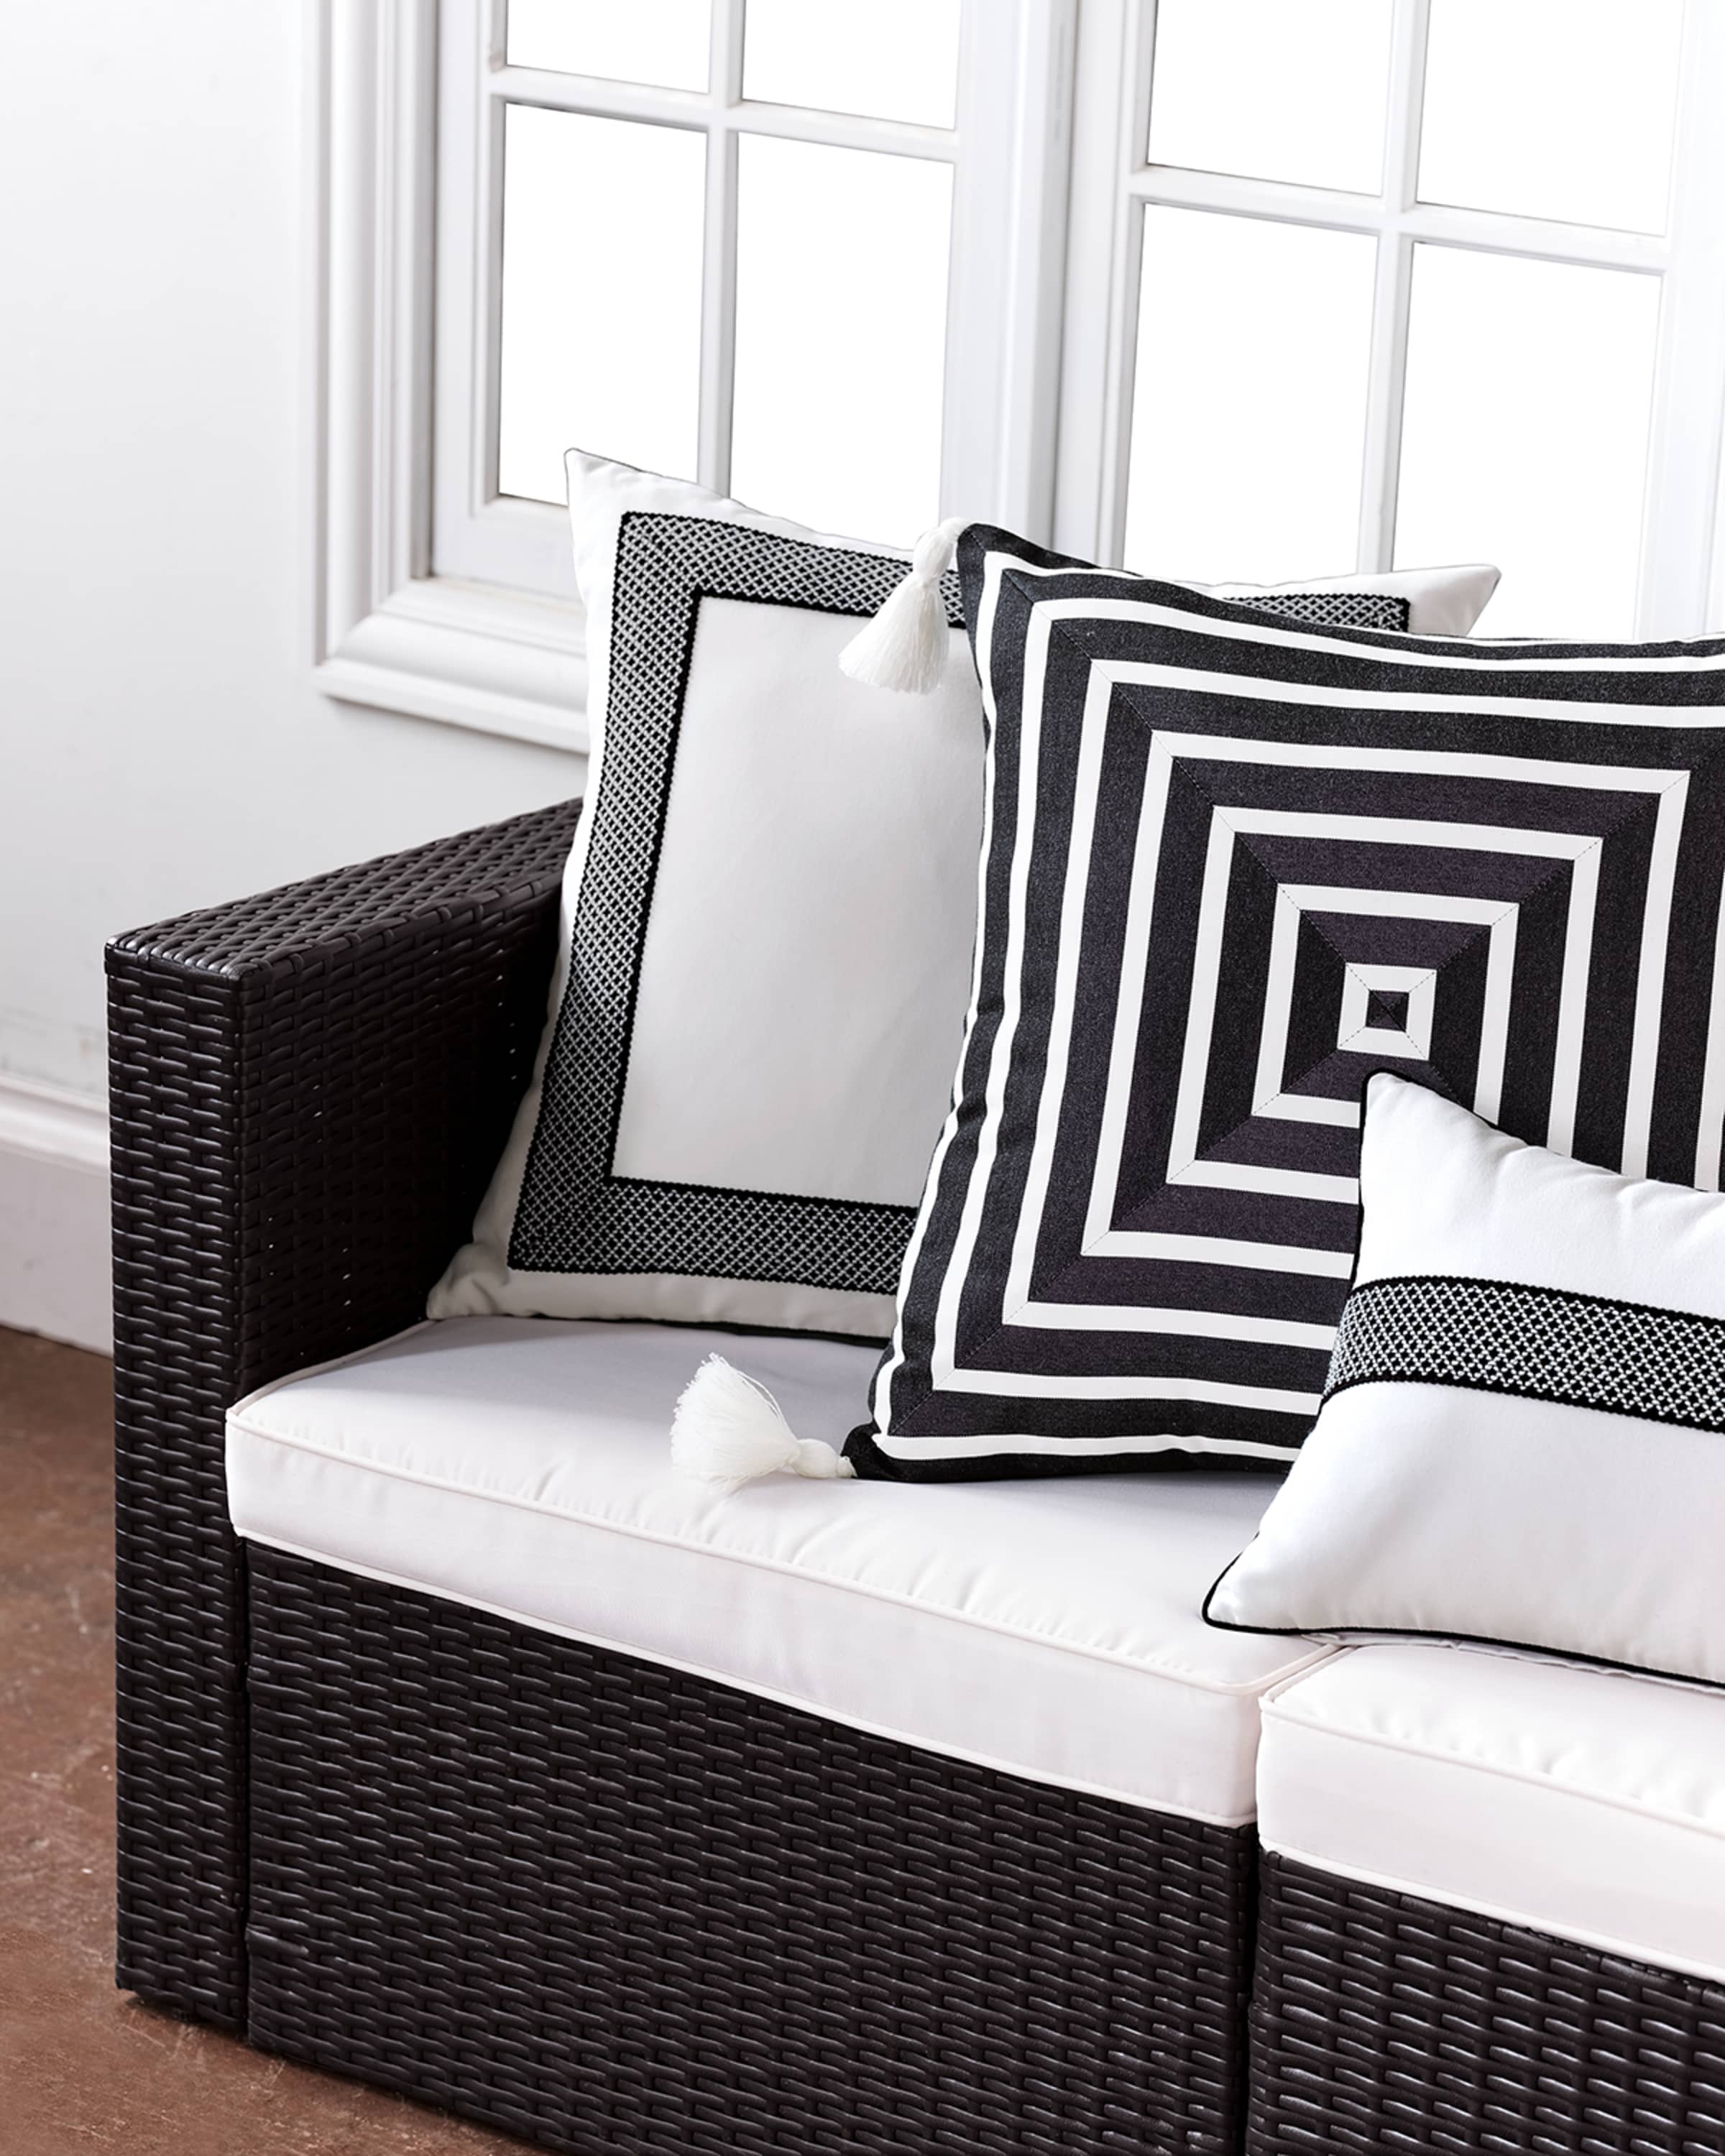 Eastern Accents Awning Monochrome Pillow